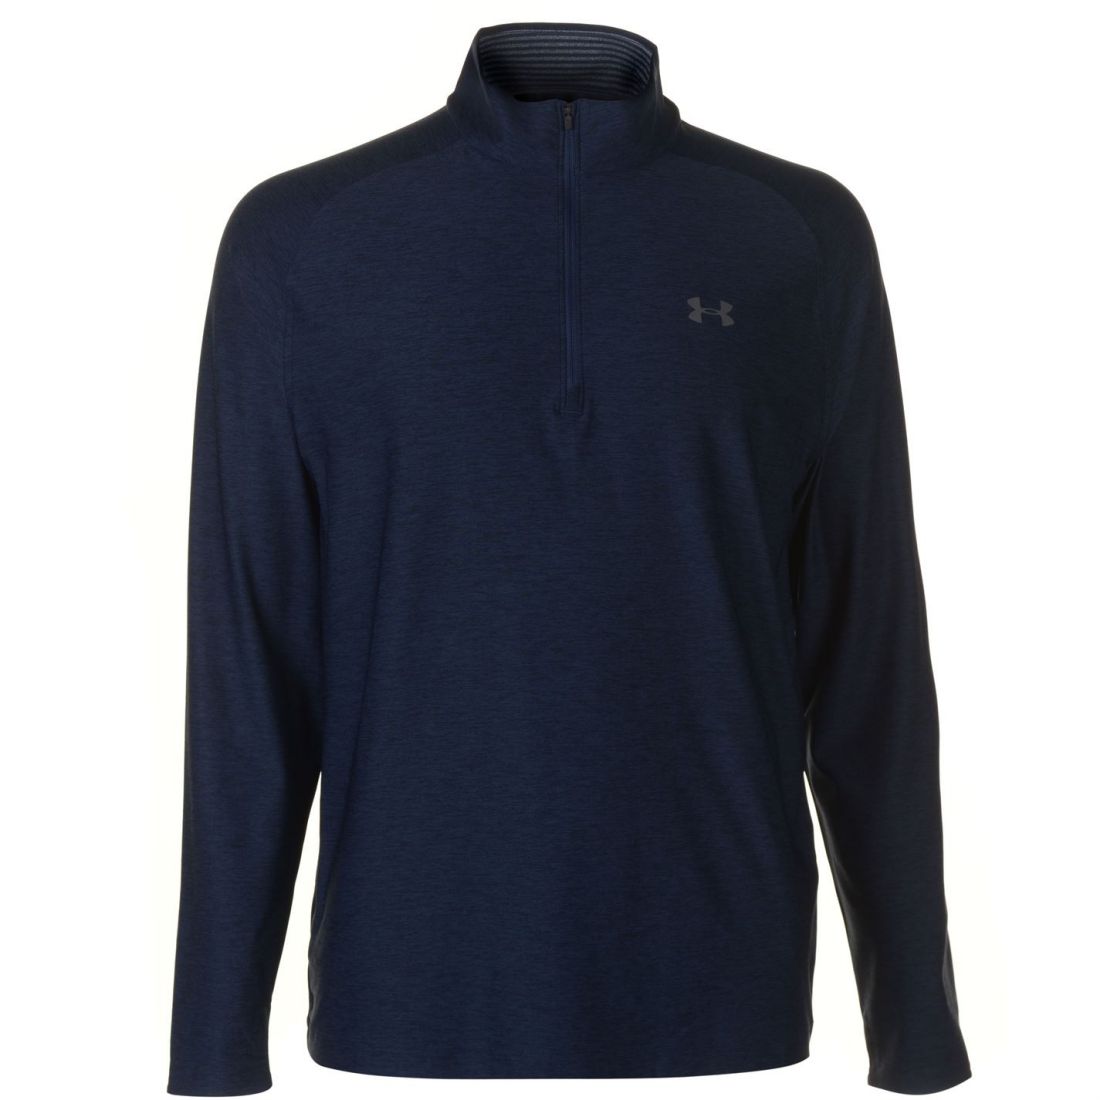 Under Armour Mens Play Off Half Zip Top Pullover Sweater Jumper Long ...